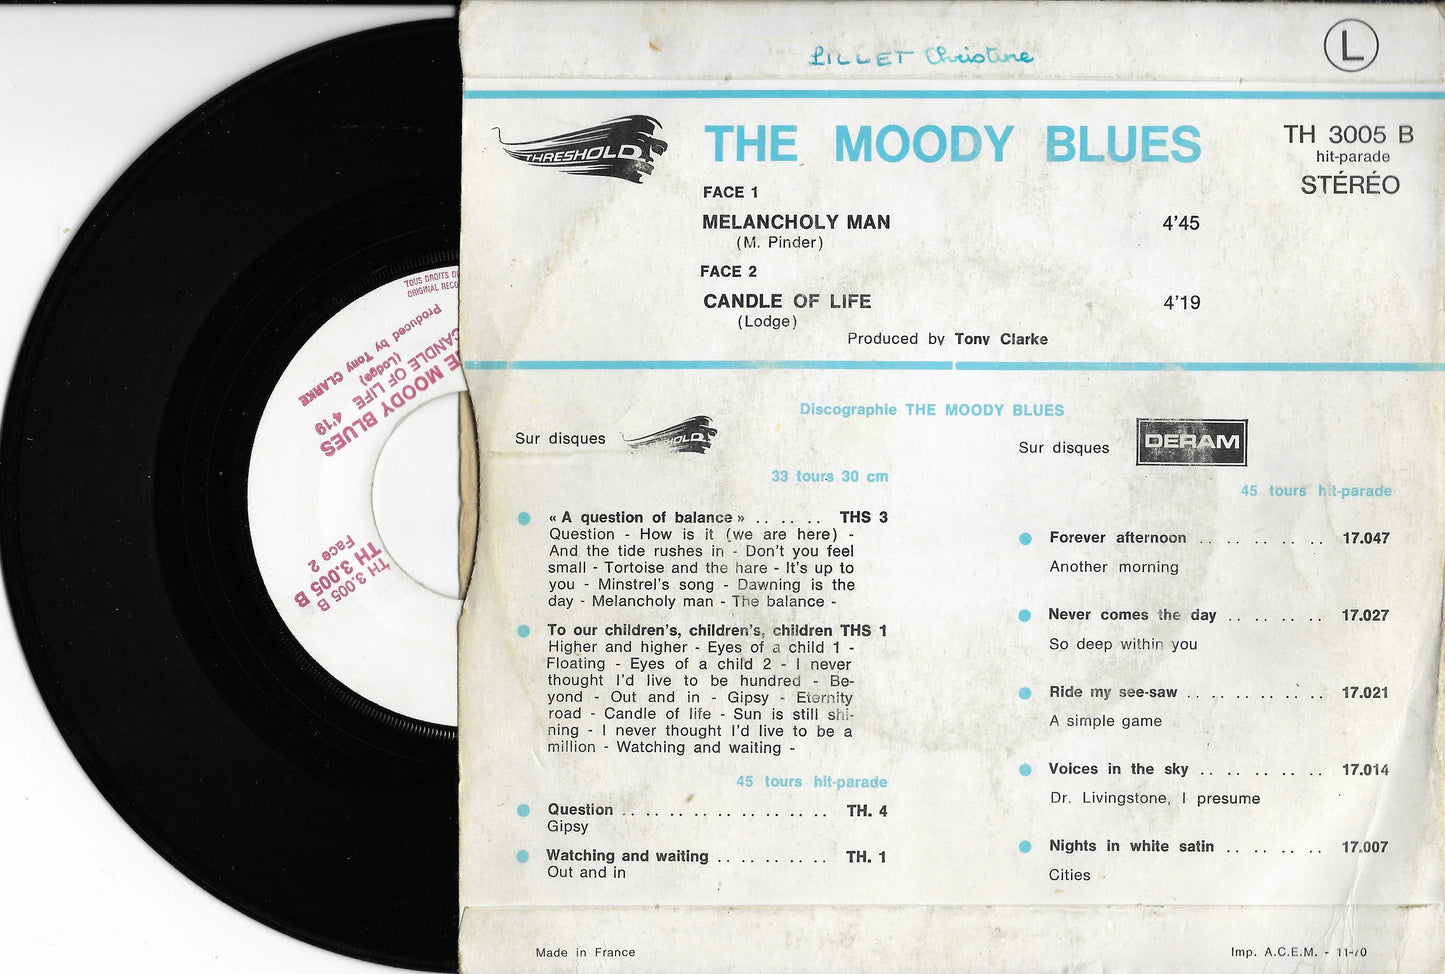 THE MOODY BLUES - Melancholy Man / Candle Of Life